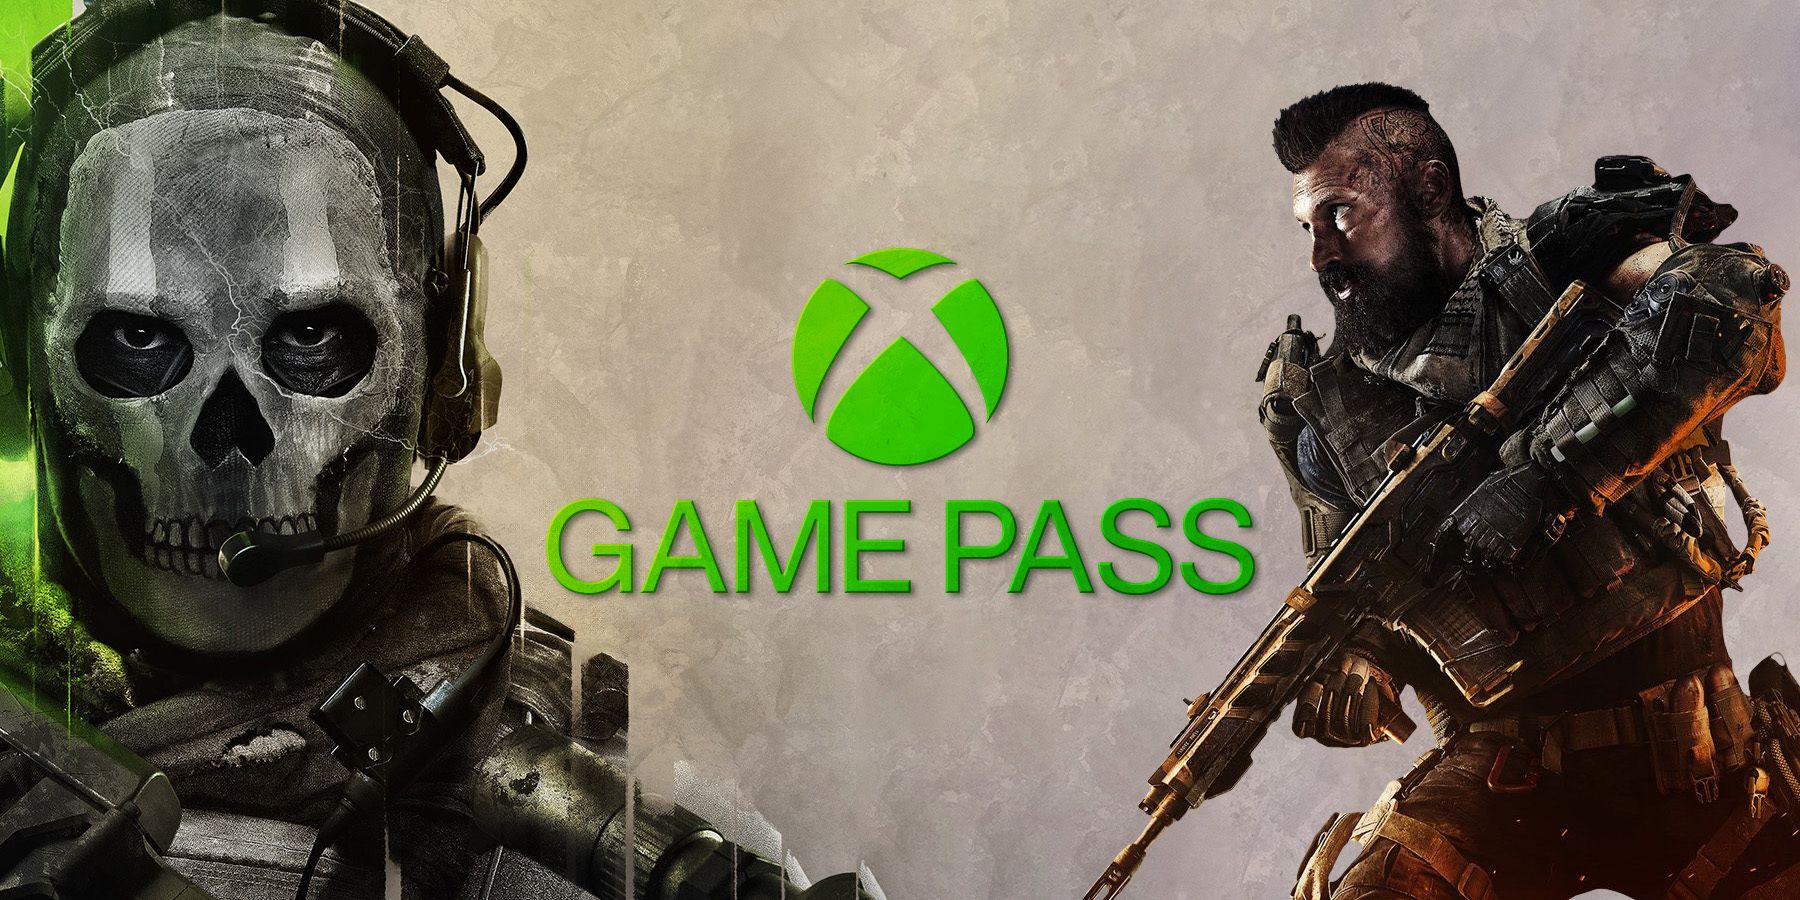 Xbox Acquiring Activision is Going to Be Huge for Classic Call of Duty Games  and Xbox Game Pass